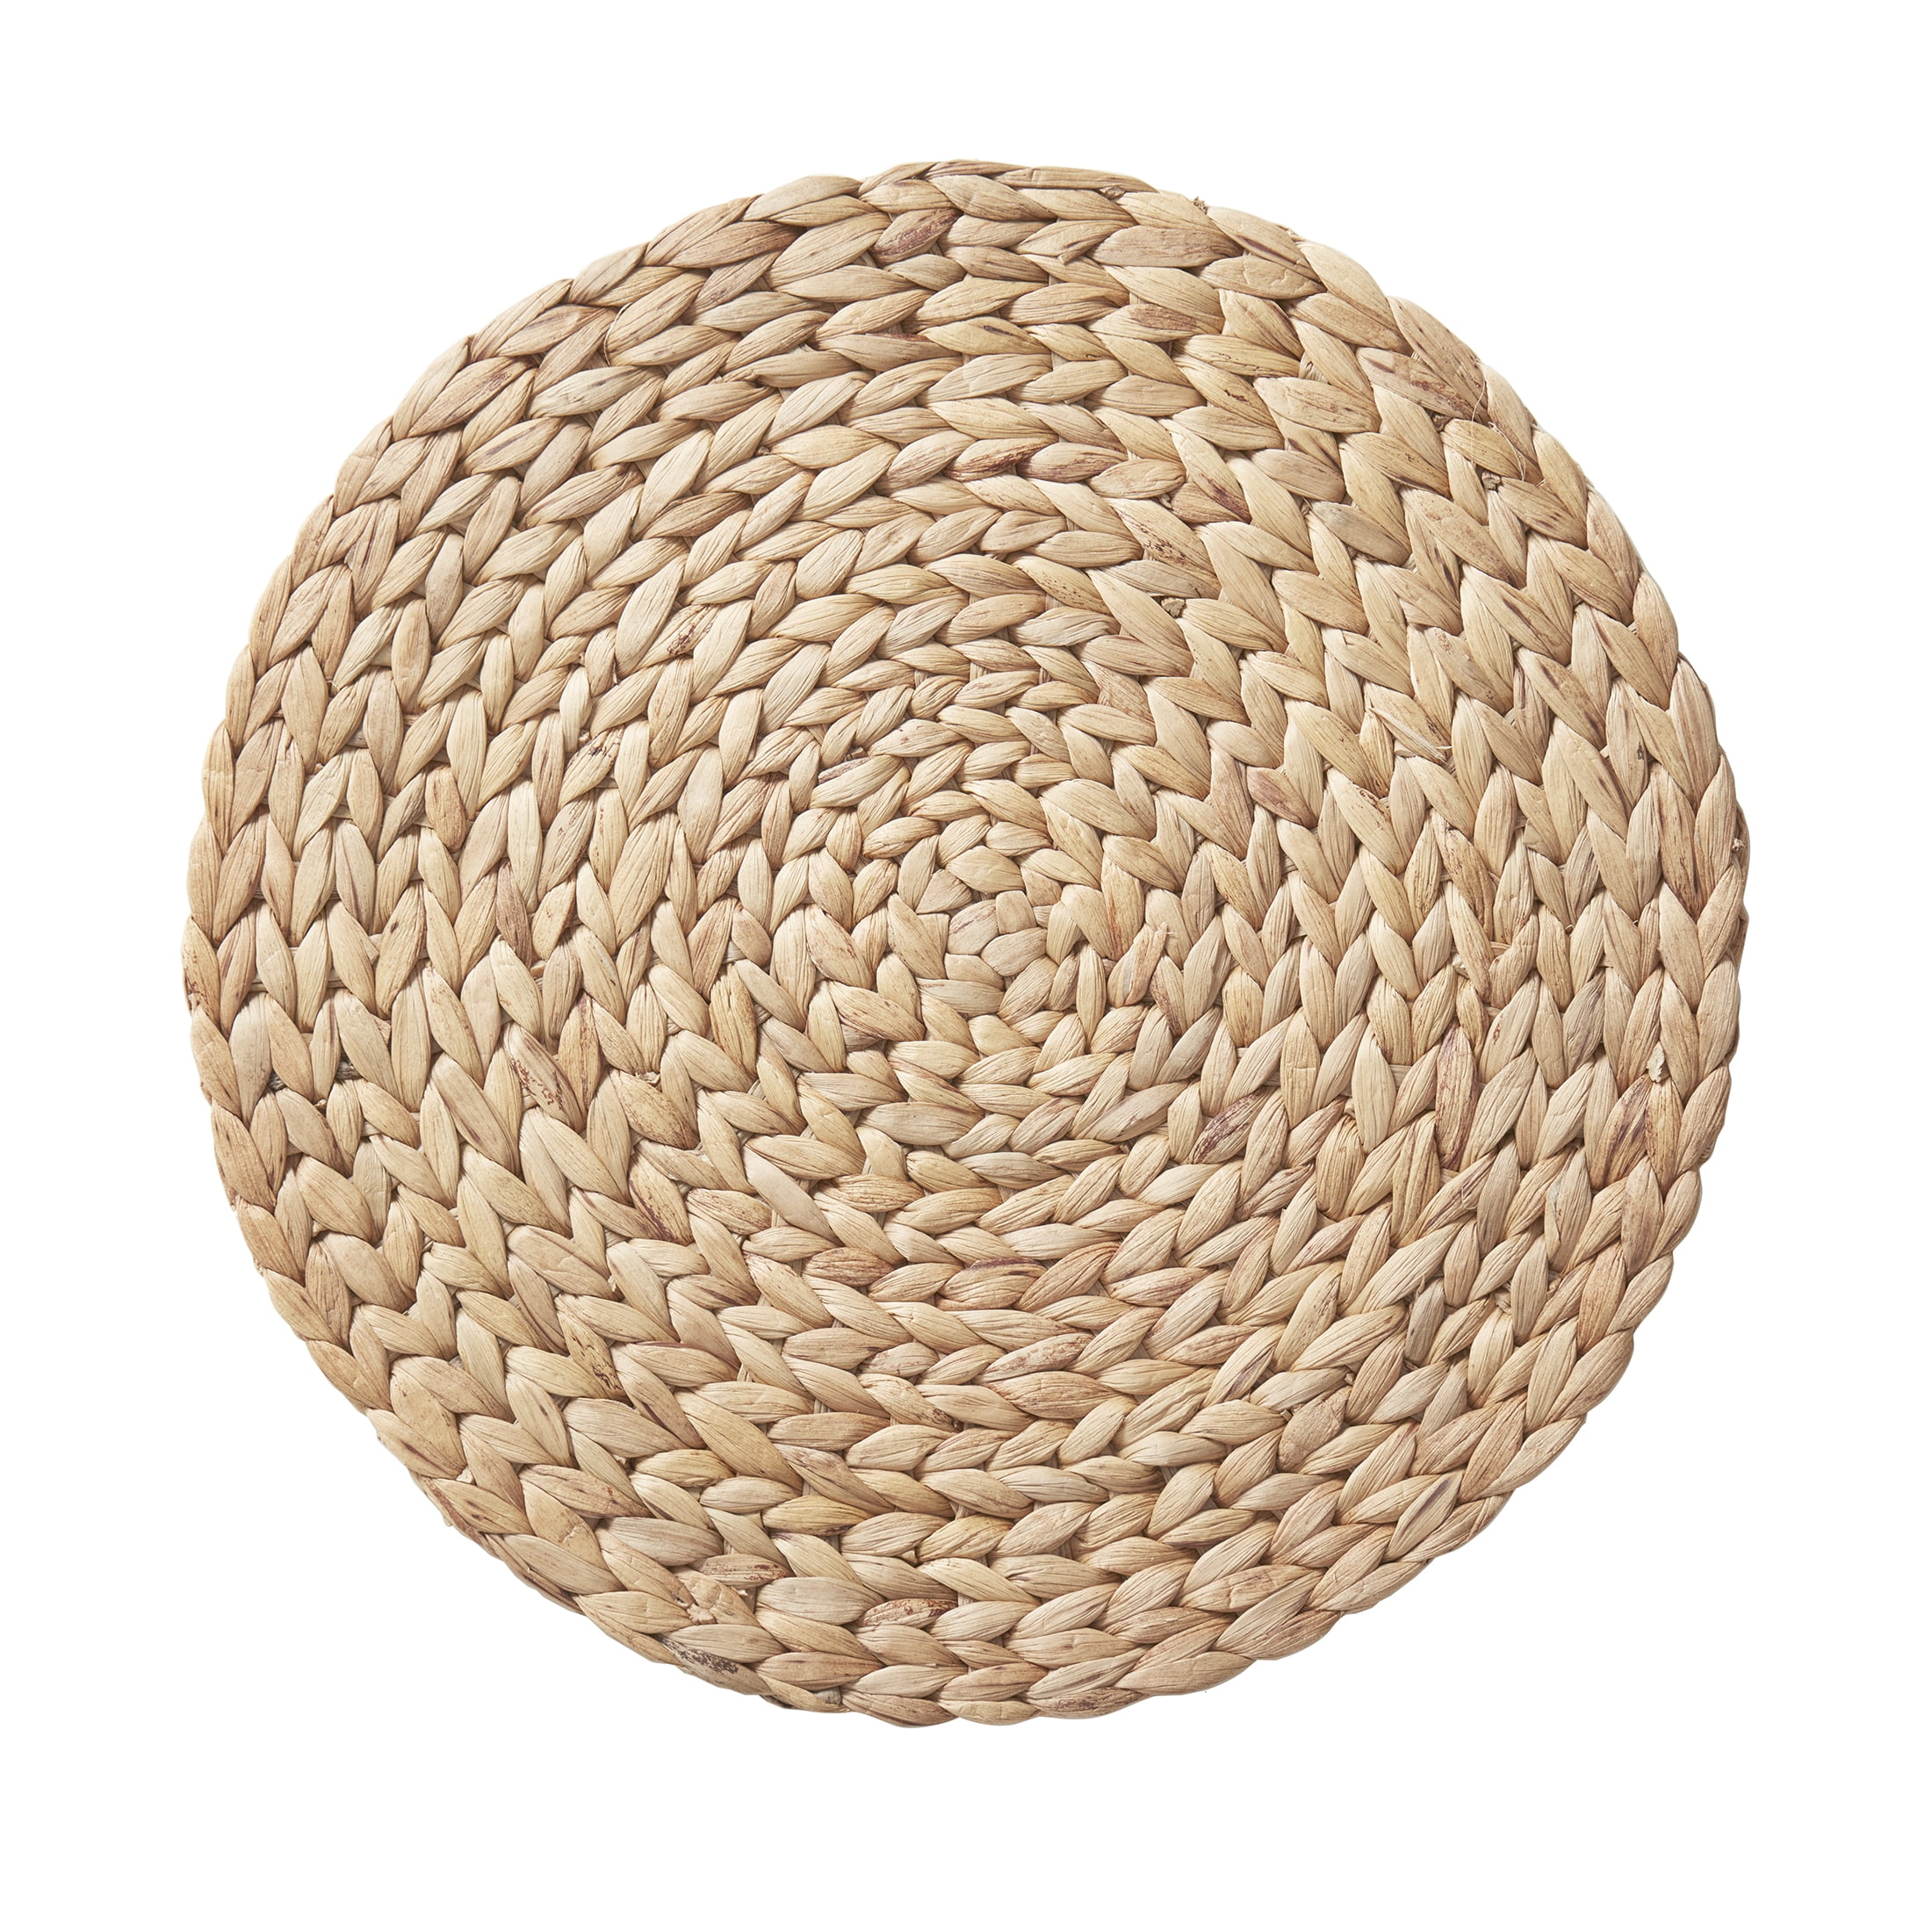 Better Homes & Gardens Natural Beige Water Hyacinth 15" Round Table Placemat, 1 Piece